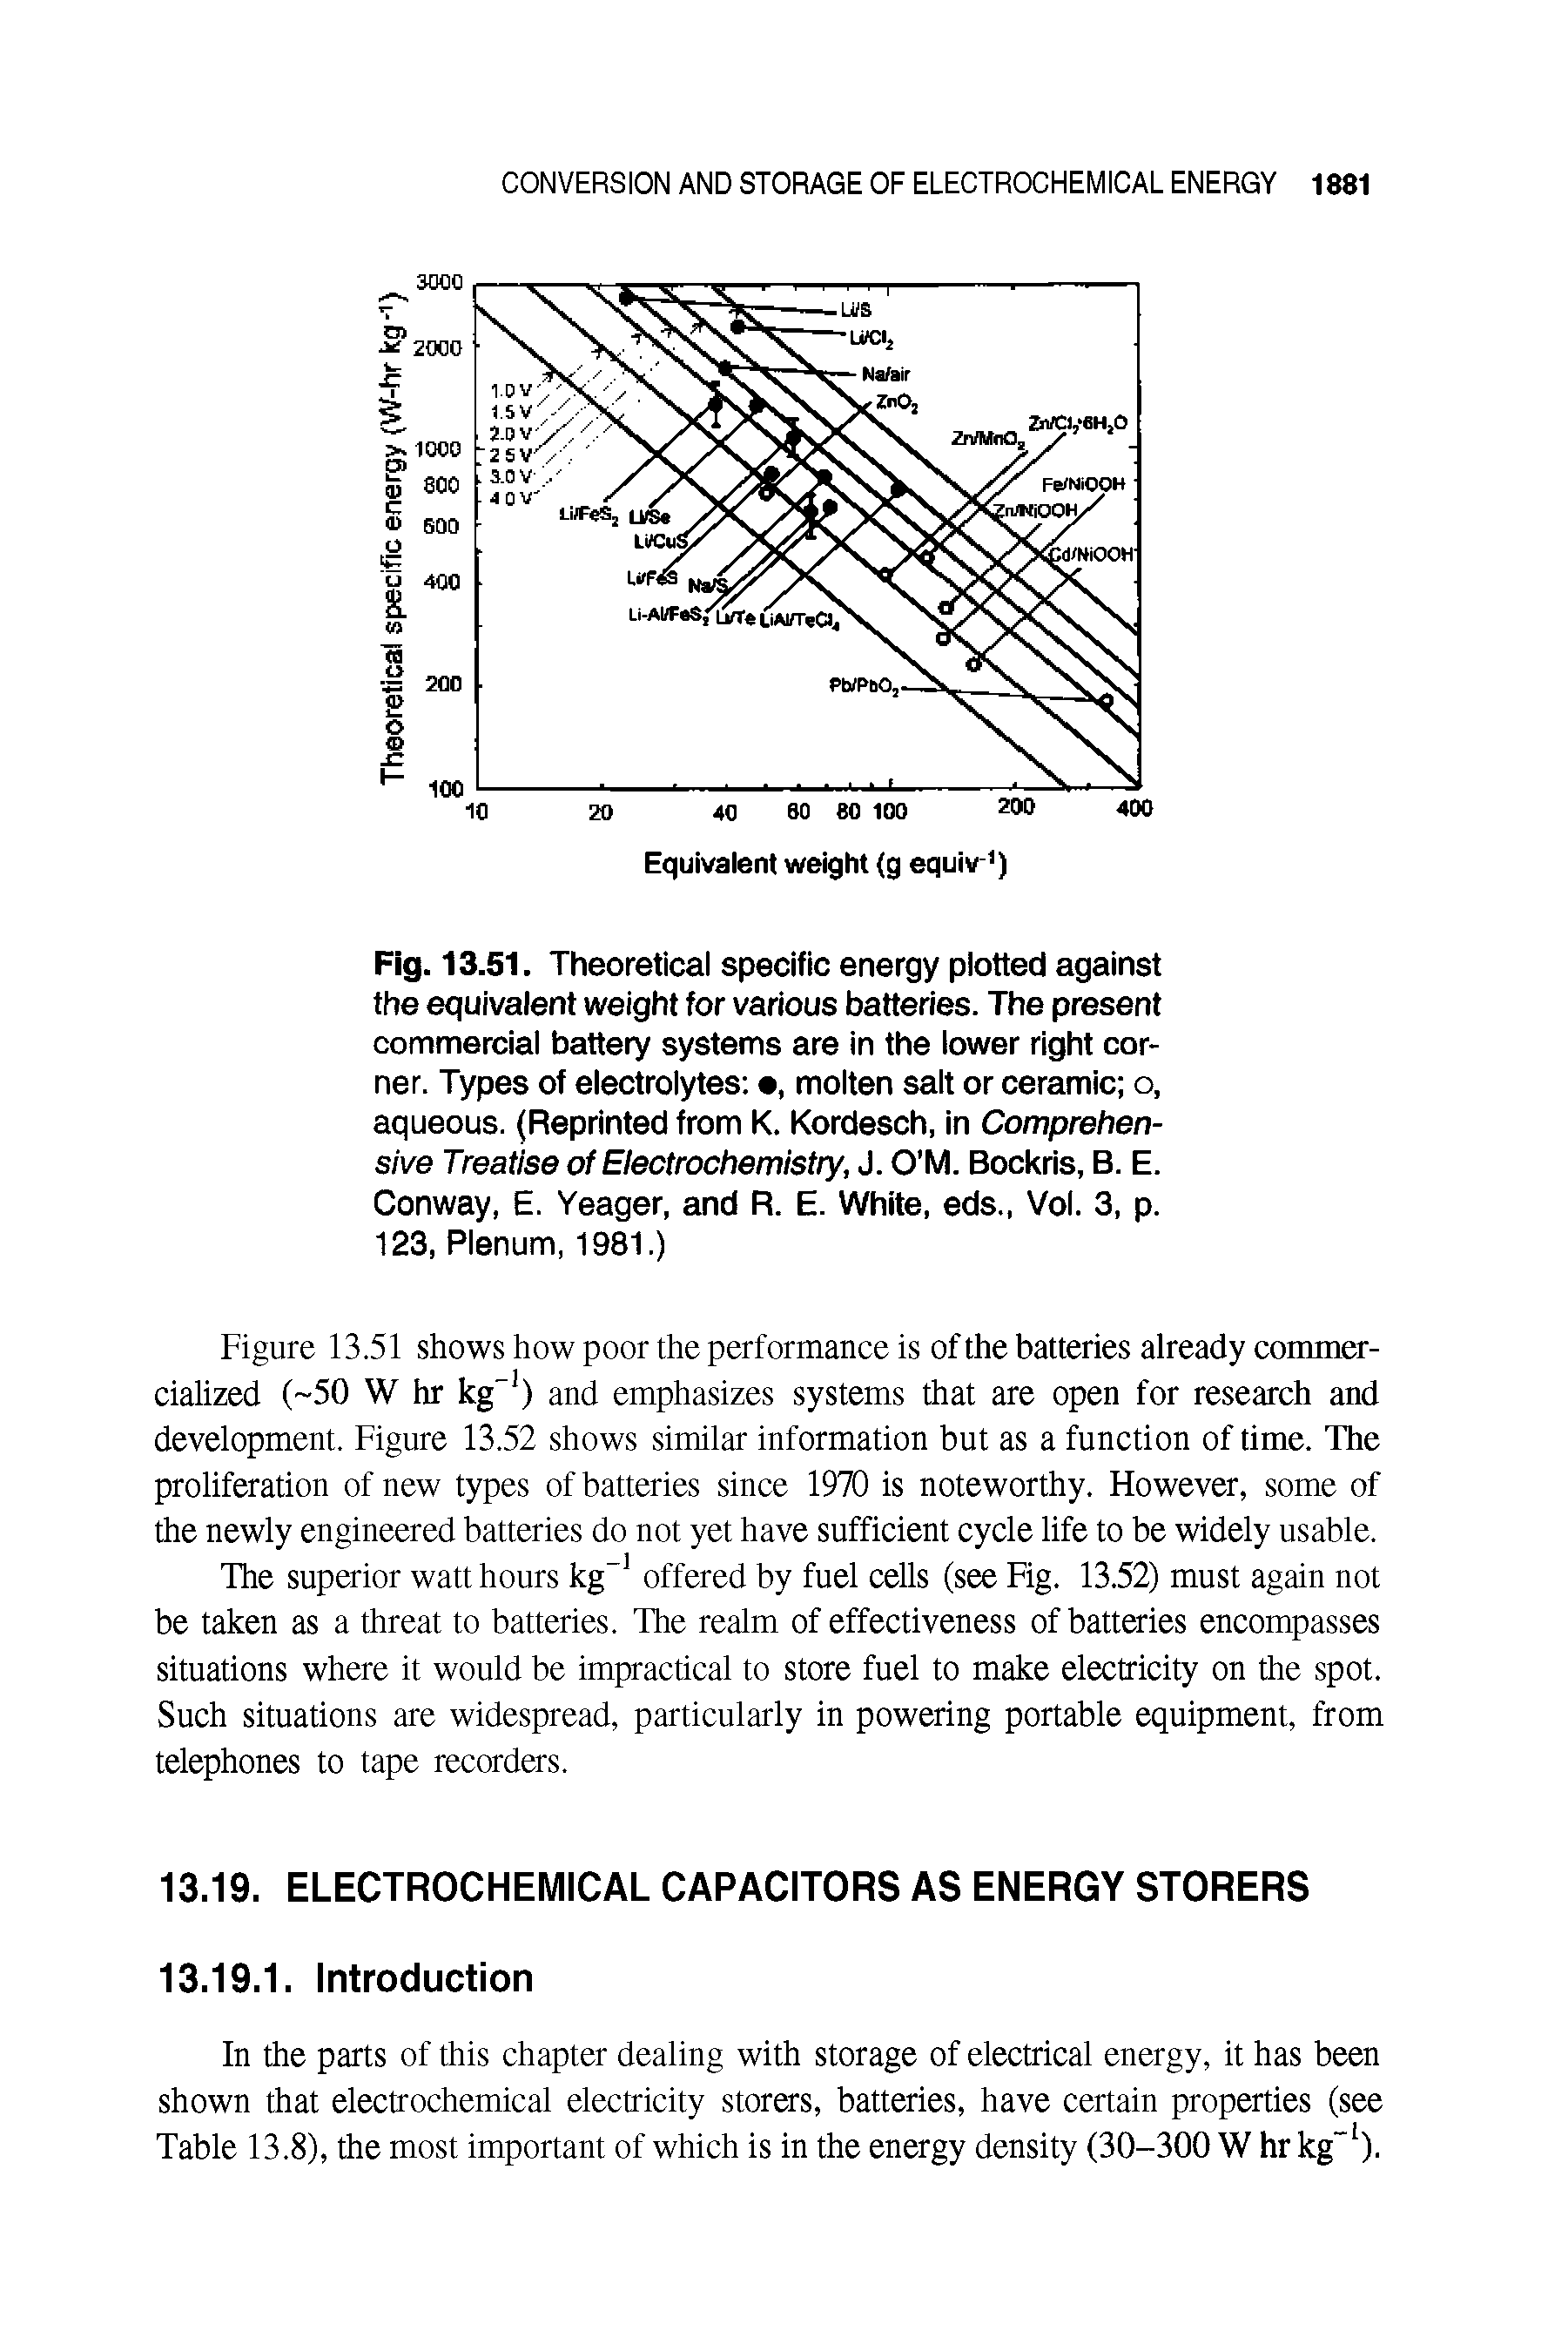 Fig. 13.51. Theoretical specific energy plotted against the equivalent weight for various batteries. The present commercial battery systems are in the lower right corner. Types of electrolytes , molten salt or ceramic o, aqueous. (Reprinted from K. Kordesch, in Comprehensive Treatise of Electrochemistry, J. O M. Bockris, B. E. Conway, E. Yeager, and R. E. White, eds., Vol. 3, p. 123, Plenum, 1981.)...